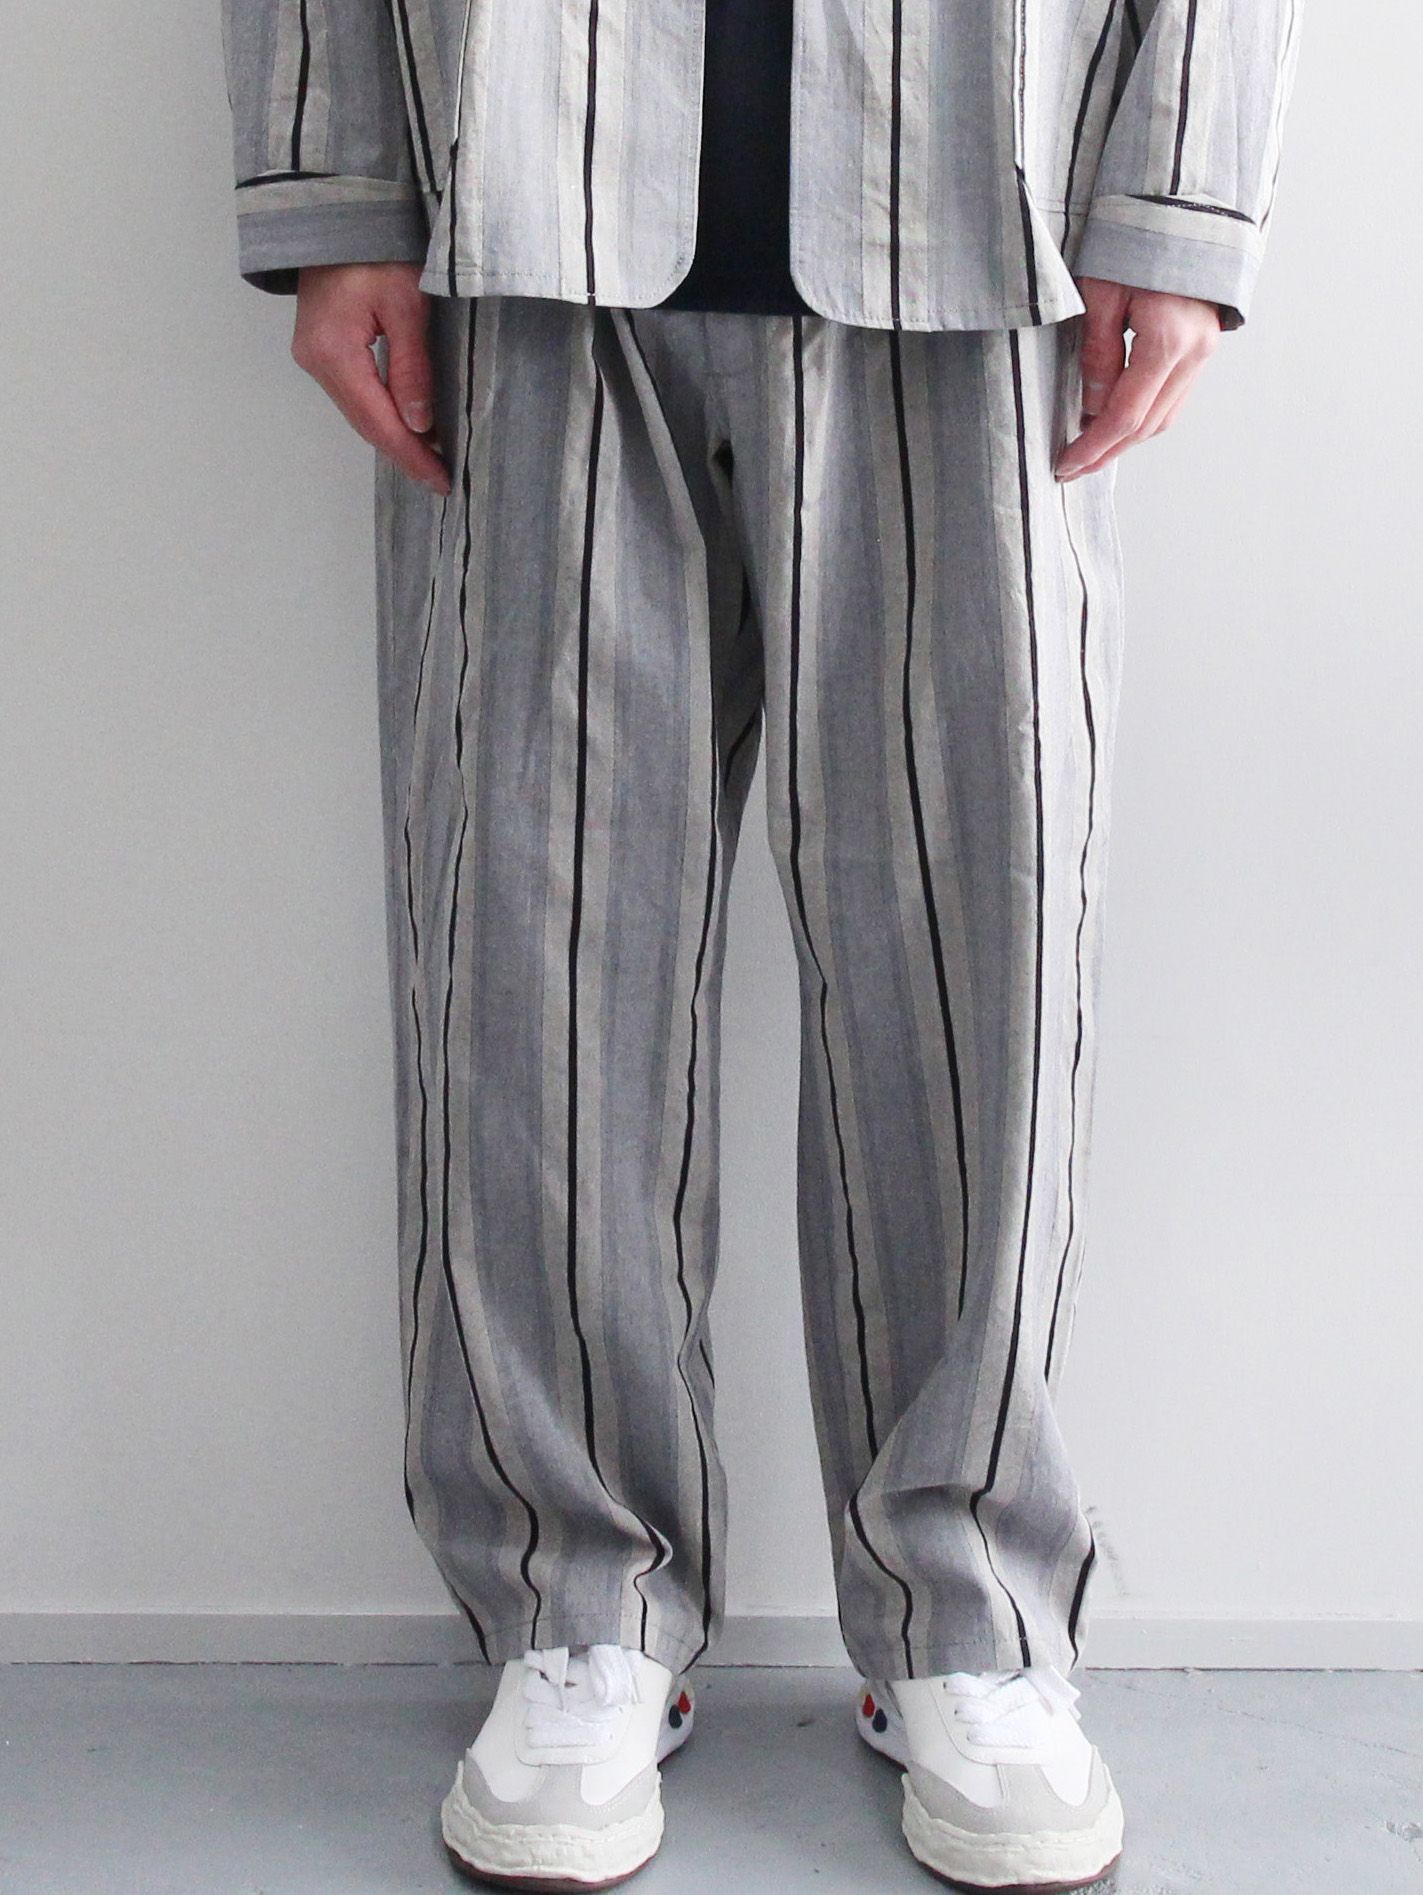 SEVEN BY SEVEN - クックパンツ - COOK PANTS - Cotton stripe